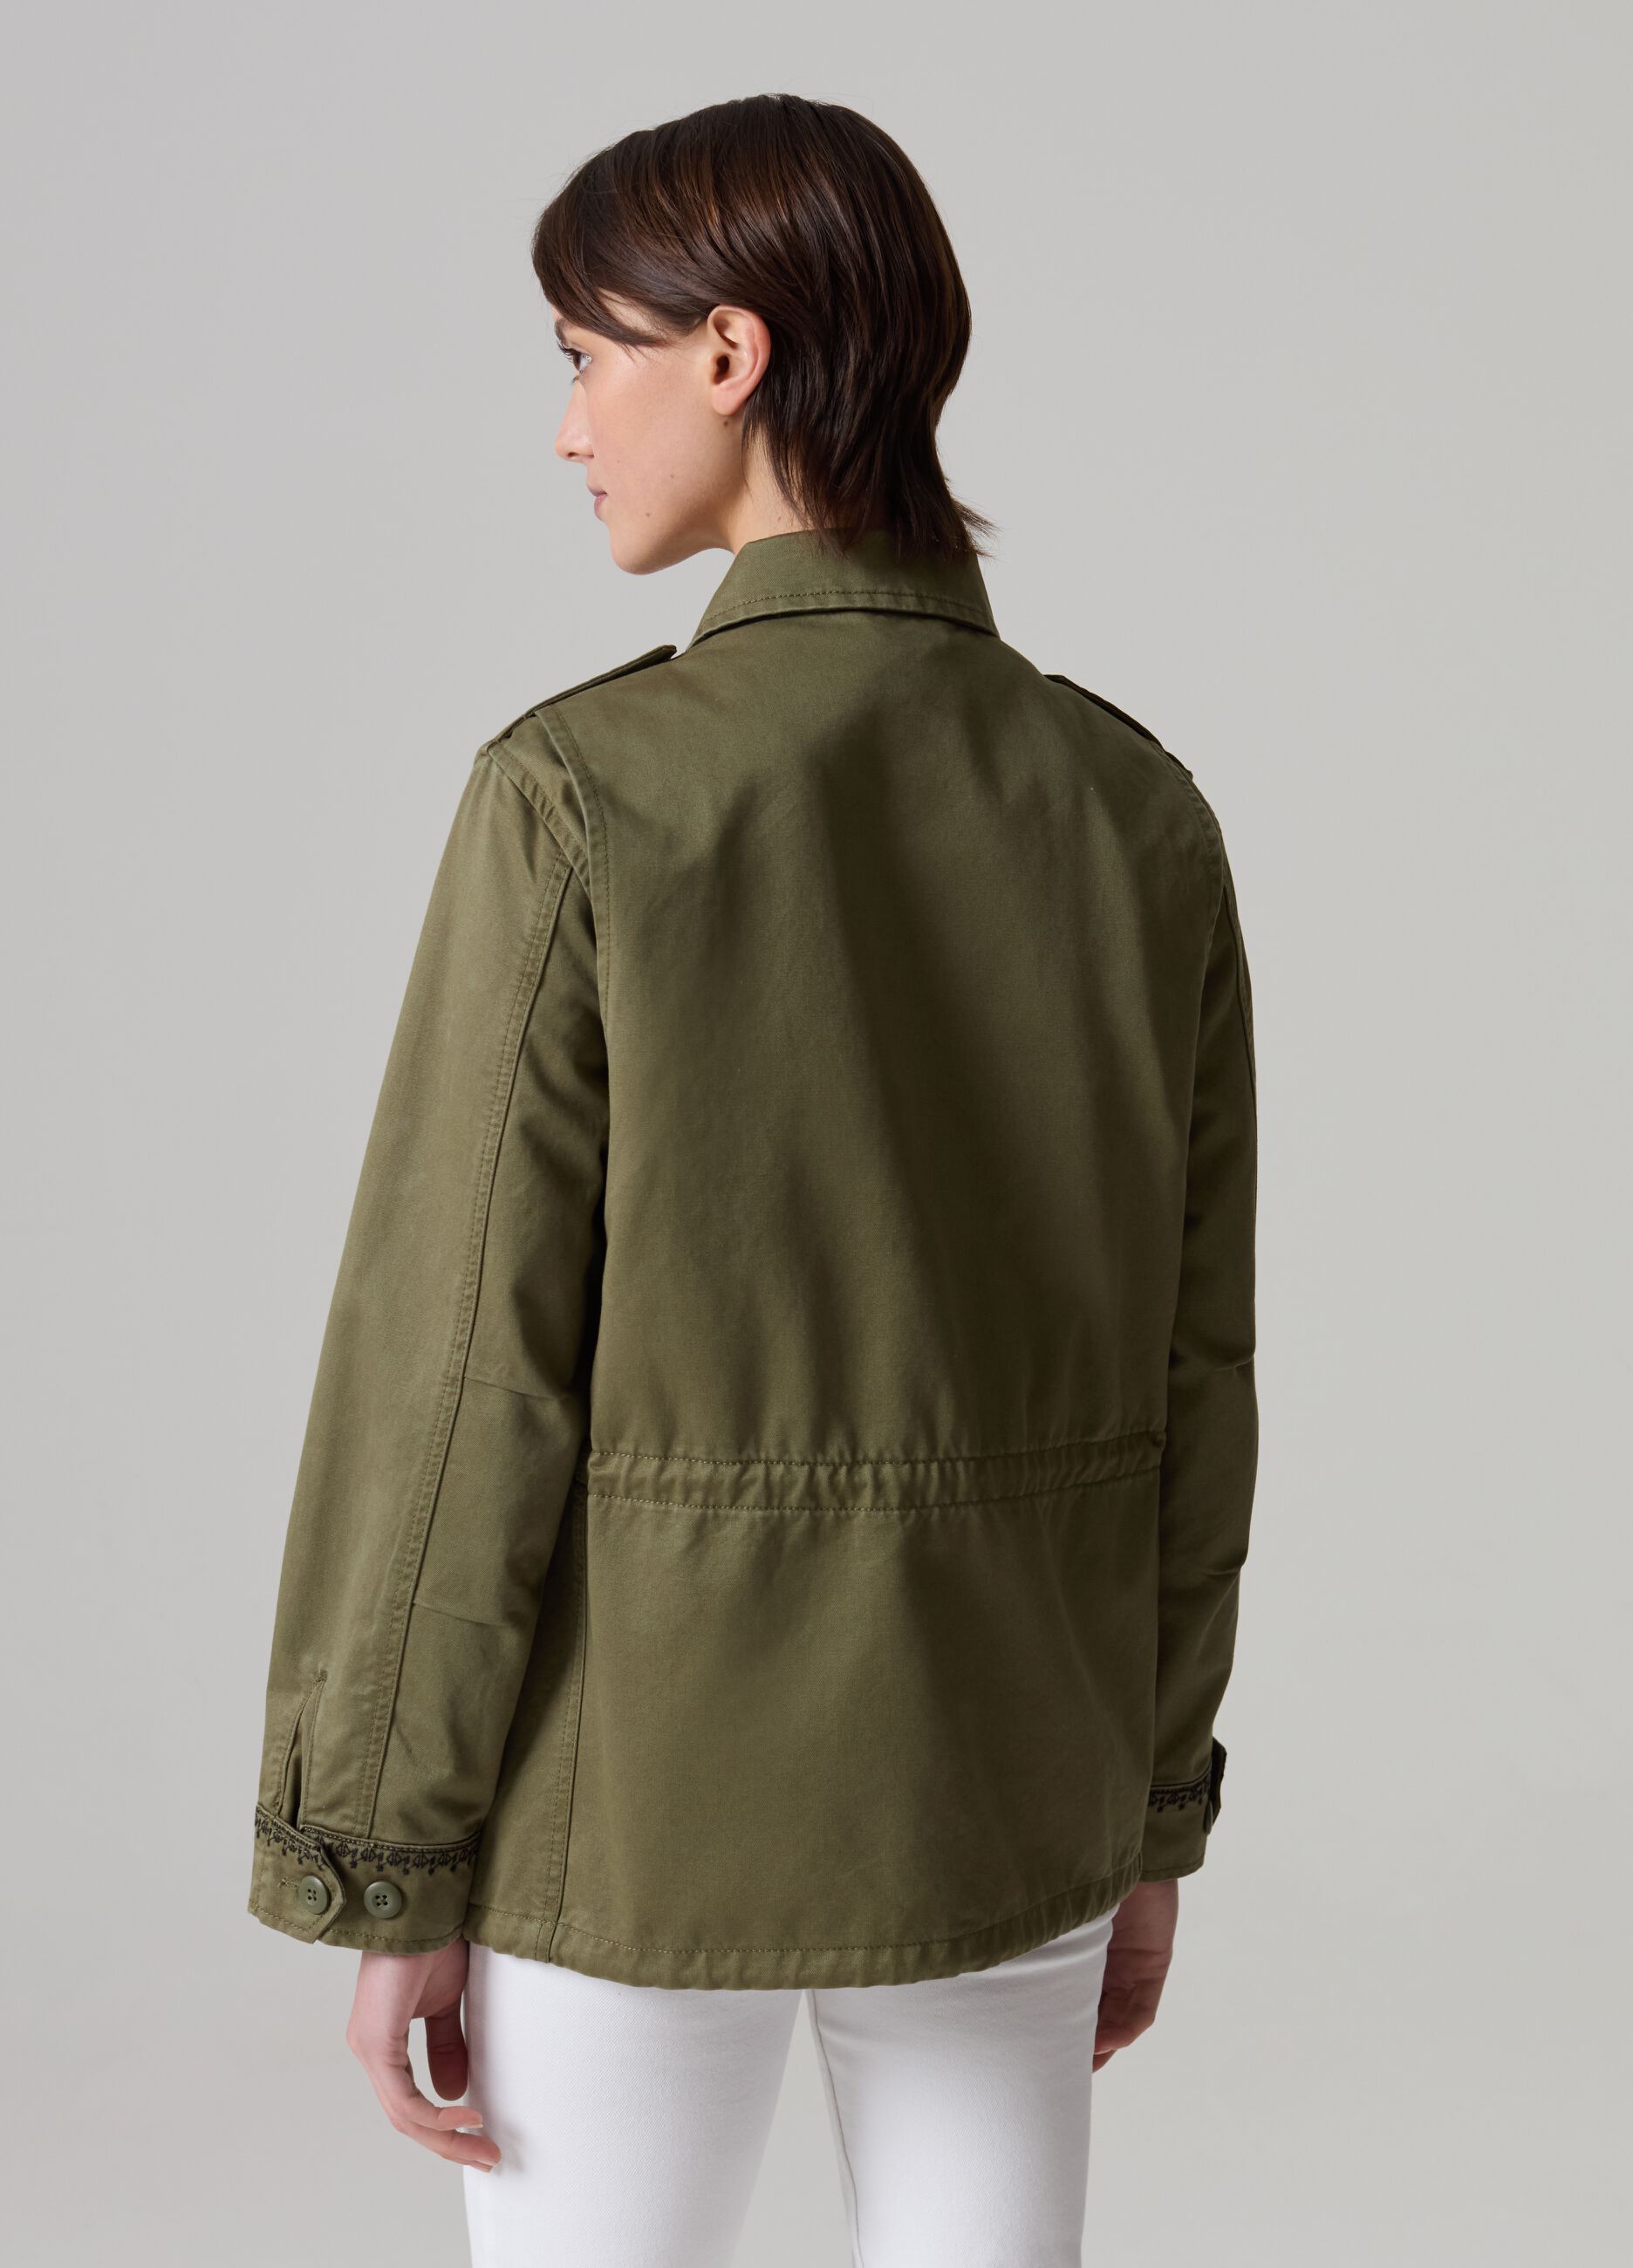 Safari jacket with embroidered details_2